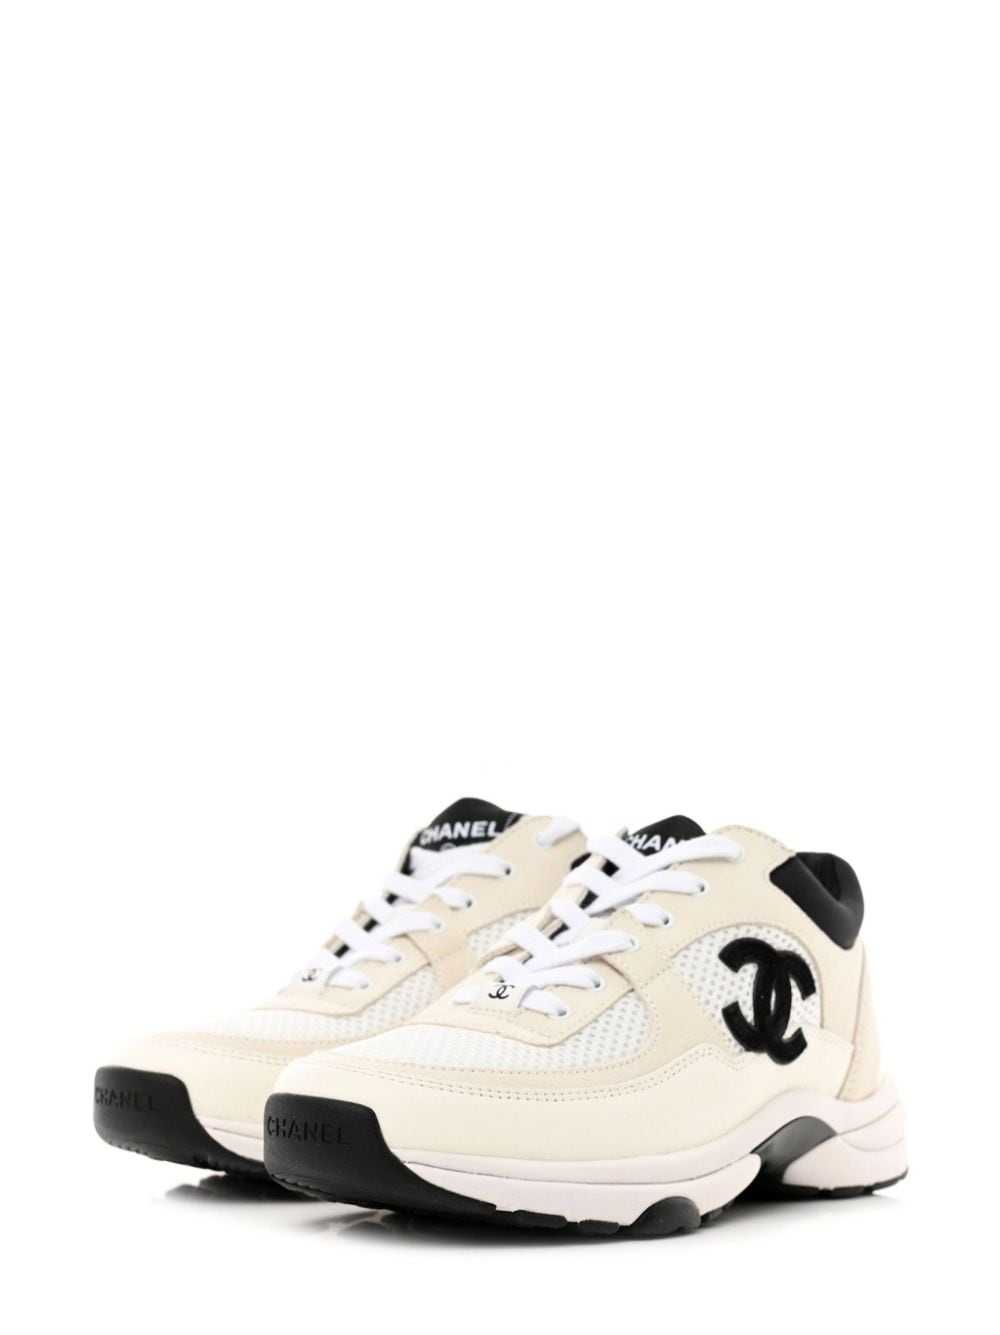 CHANEL Pre-Owned CC suede lace-up sneakers - White - image 2